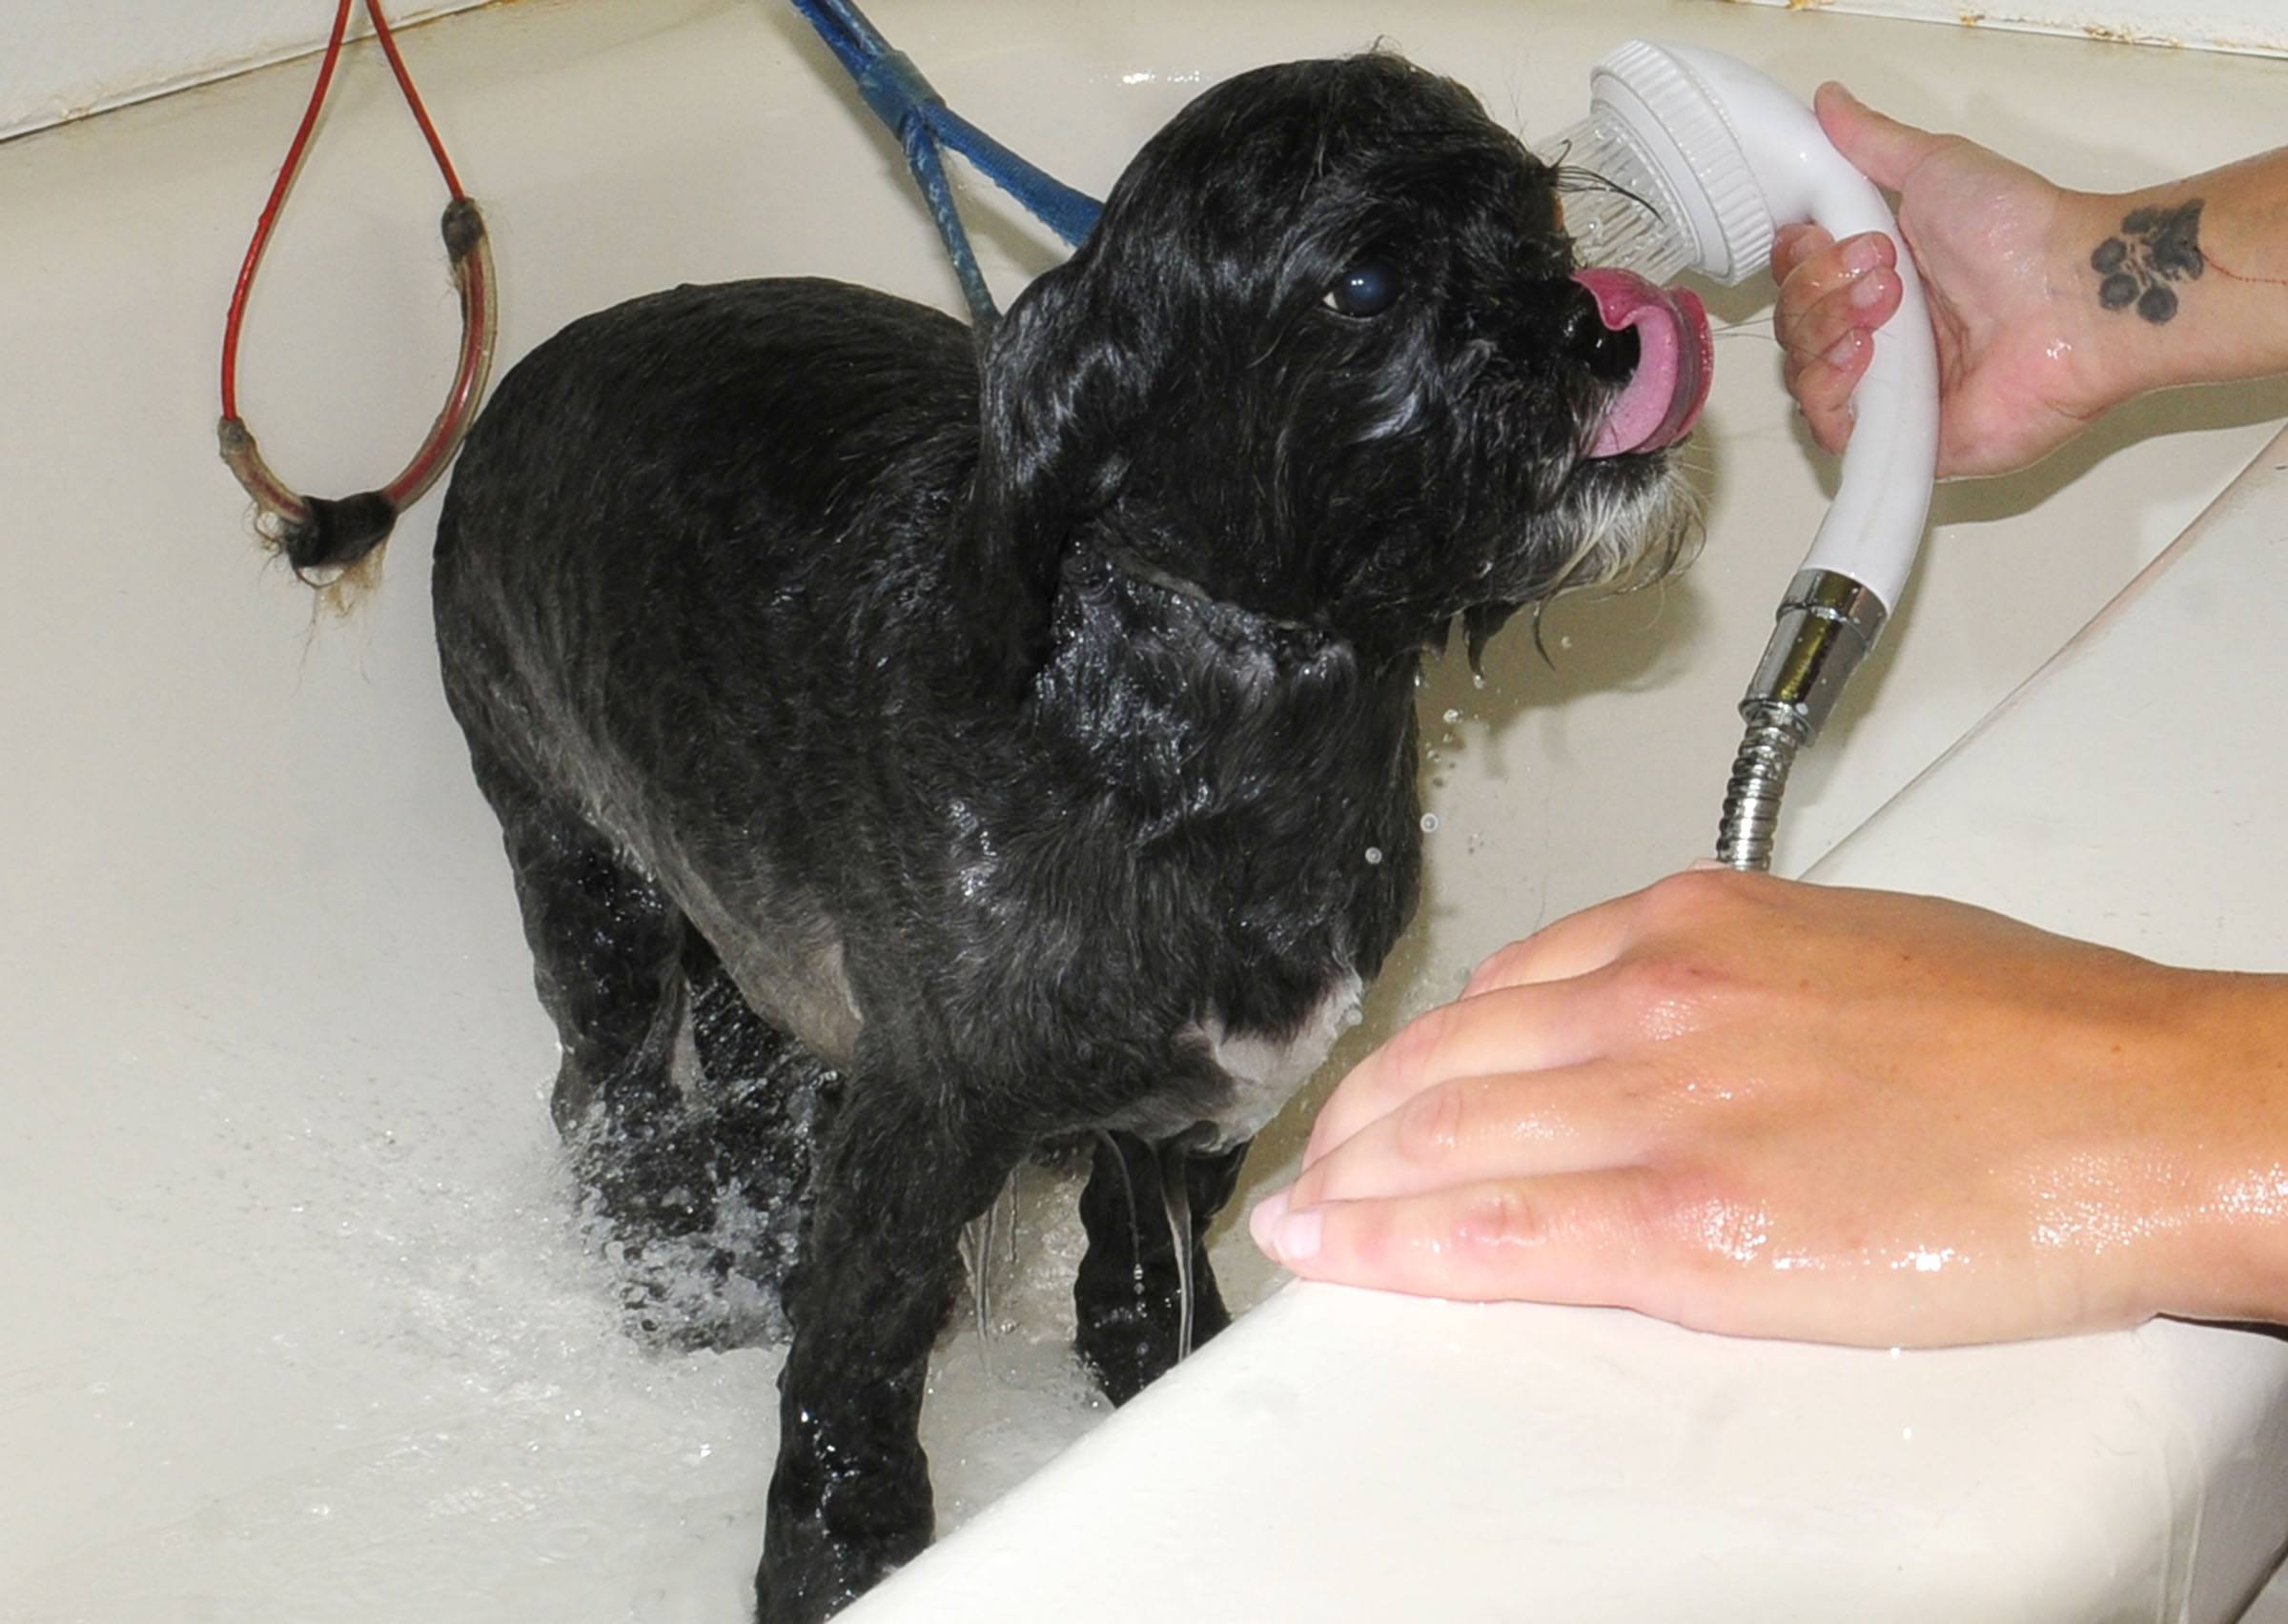 Precious Eastcott gets a bath at 4 Paws Dog Daycare and Grooming. The centre will have groomers in this year's 11th Annual Spring Dog Wash.